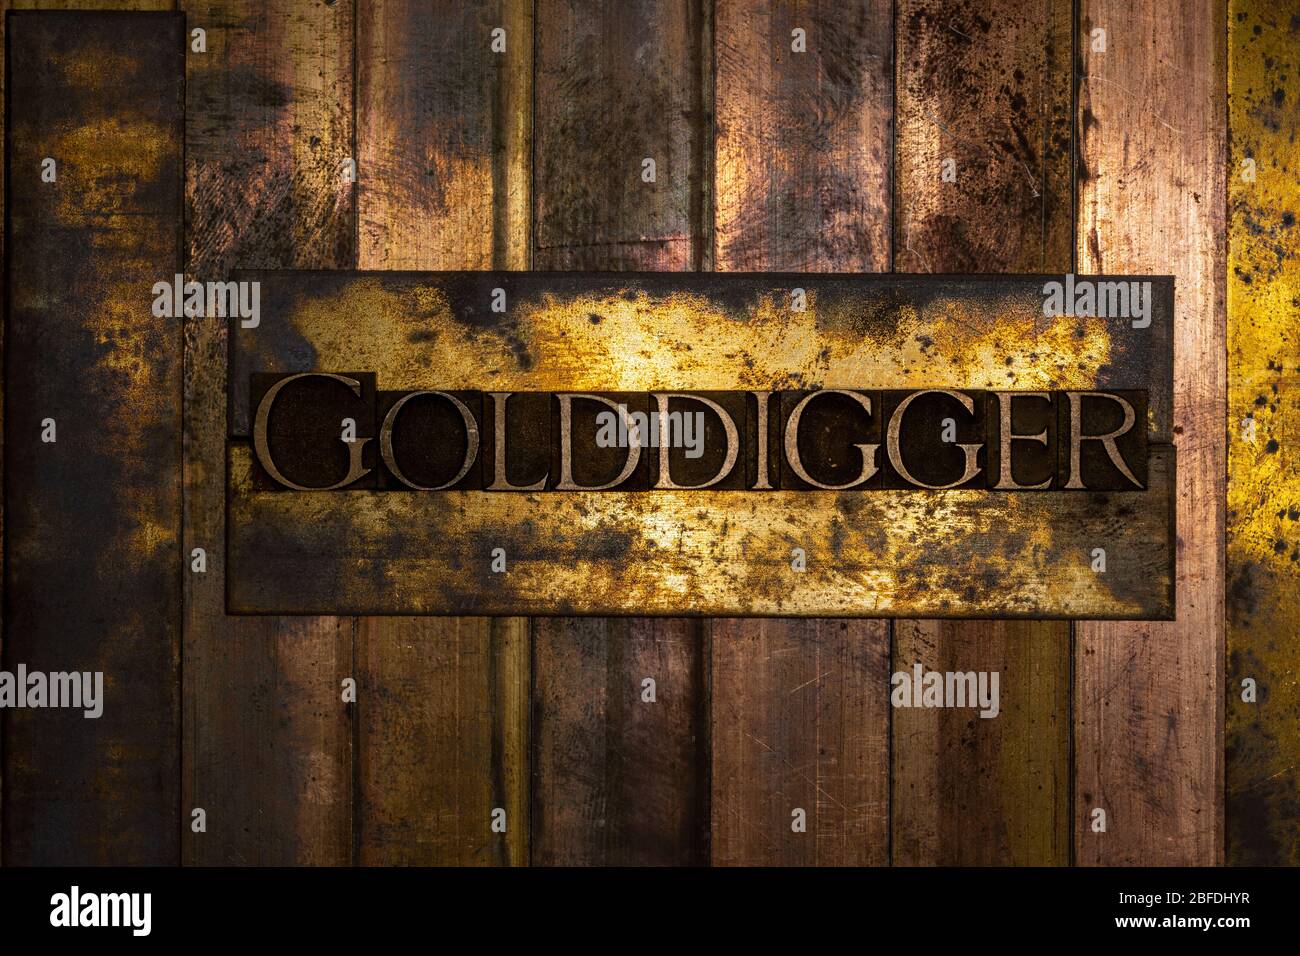 Gold Digger text on vintage textured grunge copper and gold